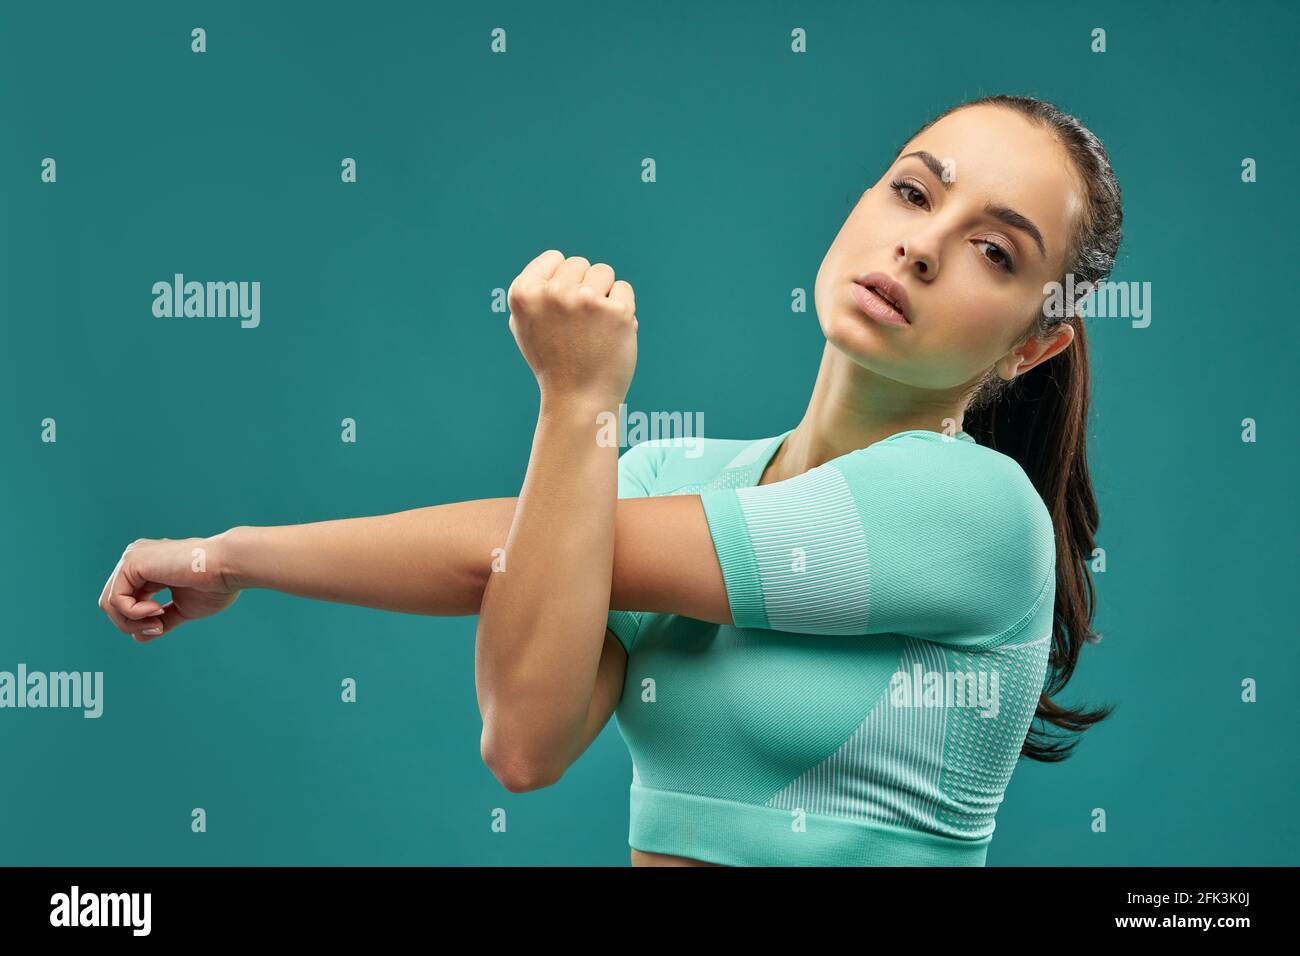 Sporty young woman stretching hands against green background Stock Photo